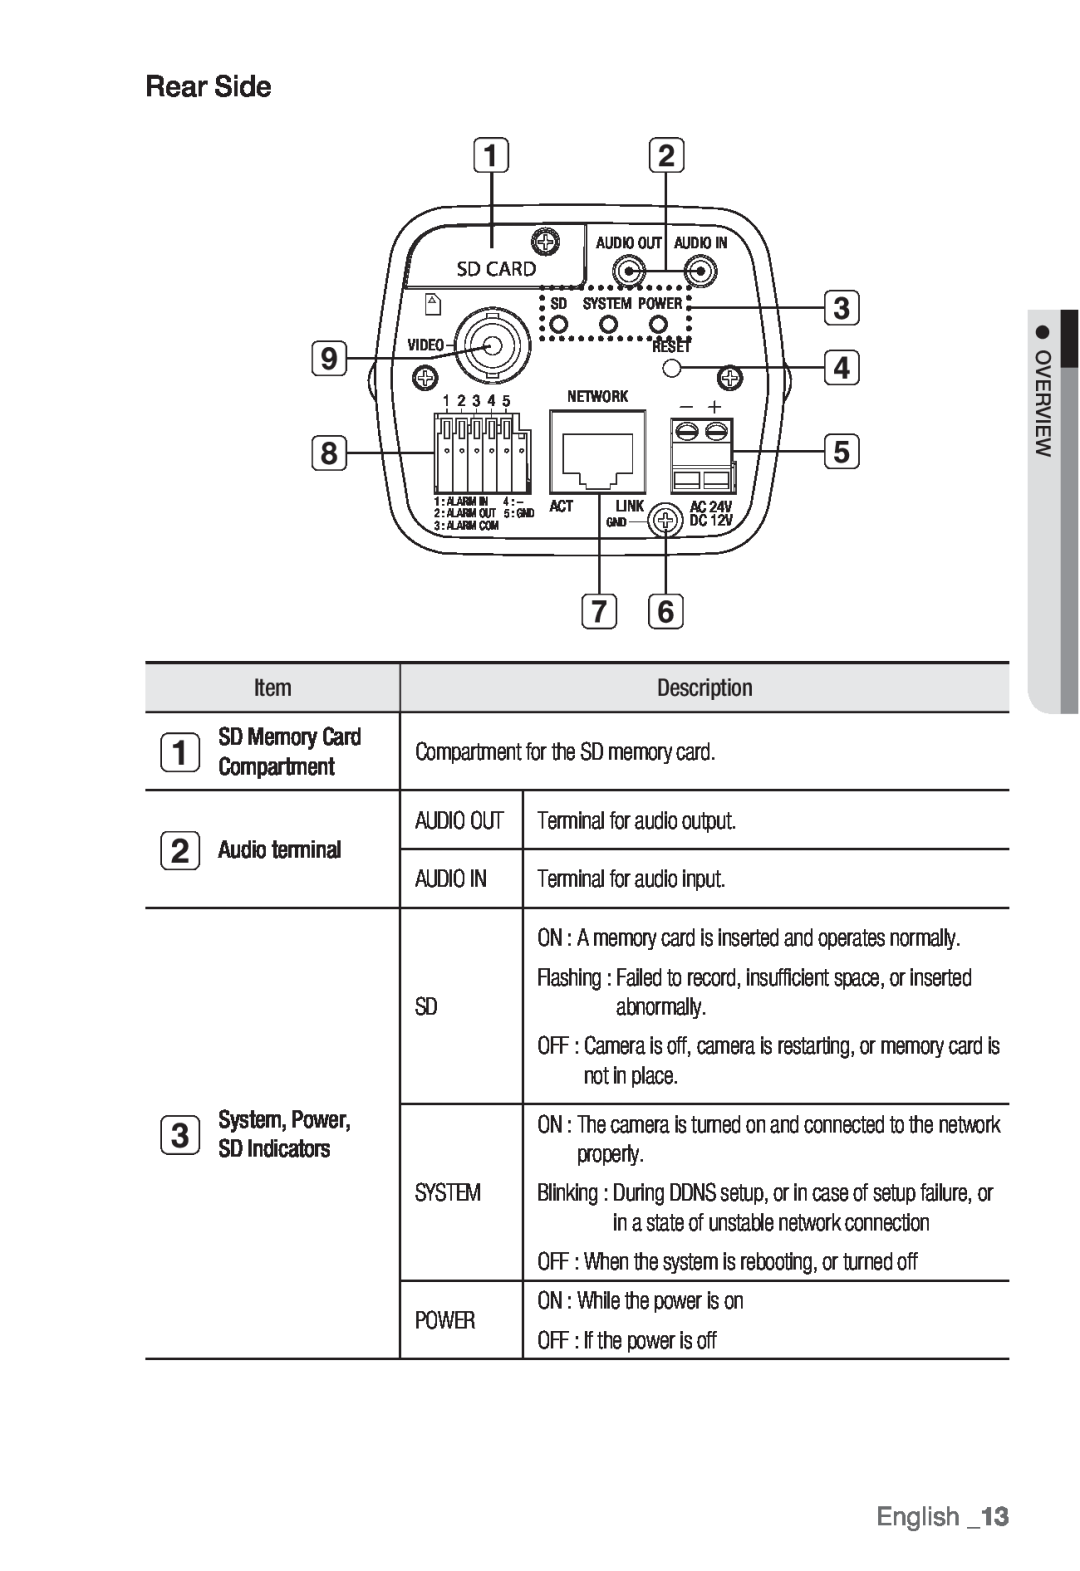 Samsung SND-5080F, SNV-5080, SNB-5000, SNB5000 user manual Rear Side, English, Audio Out 